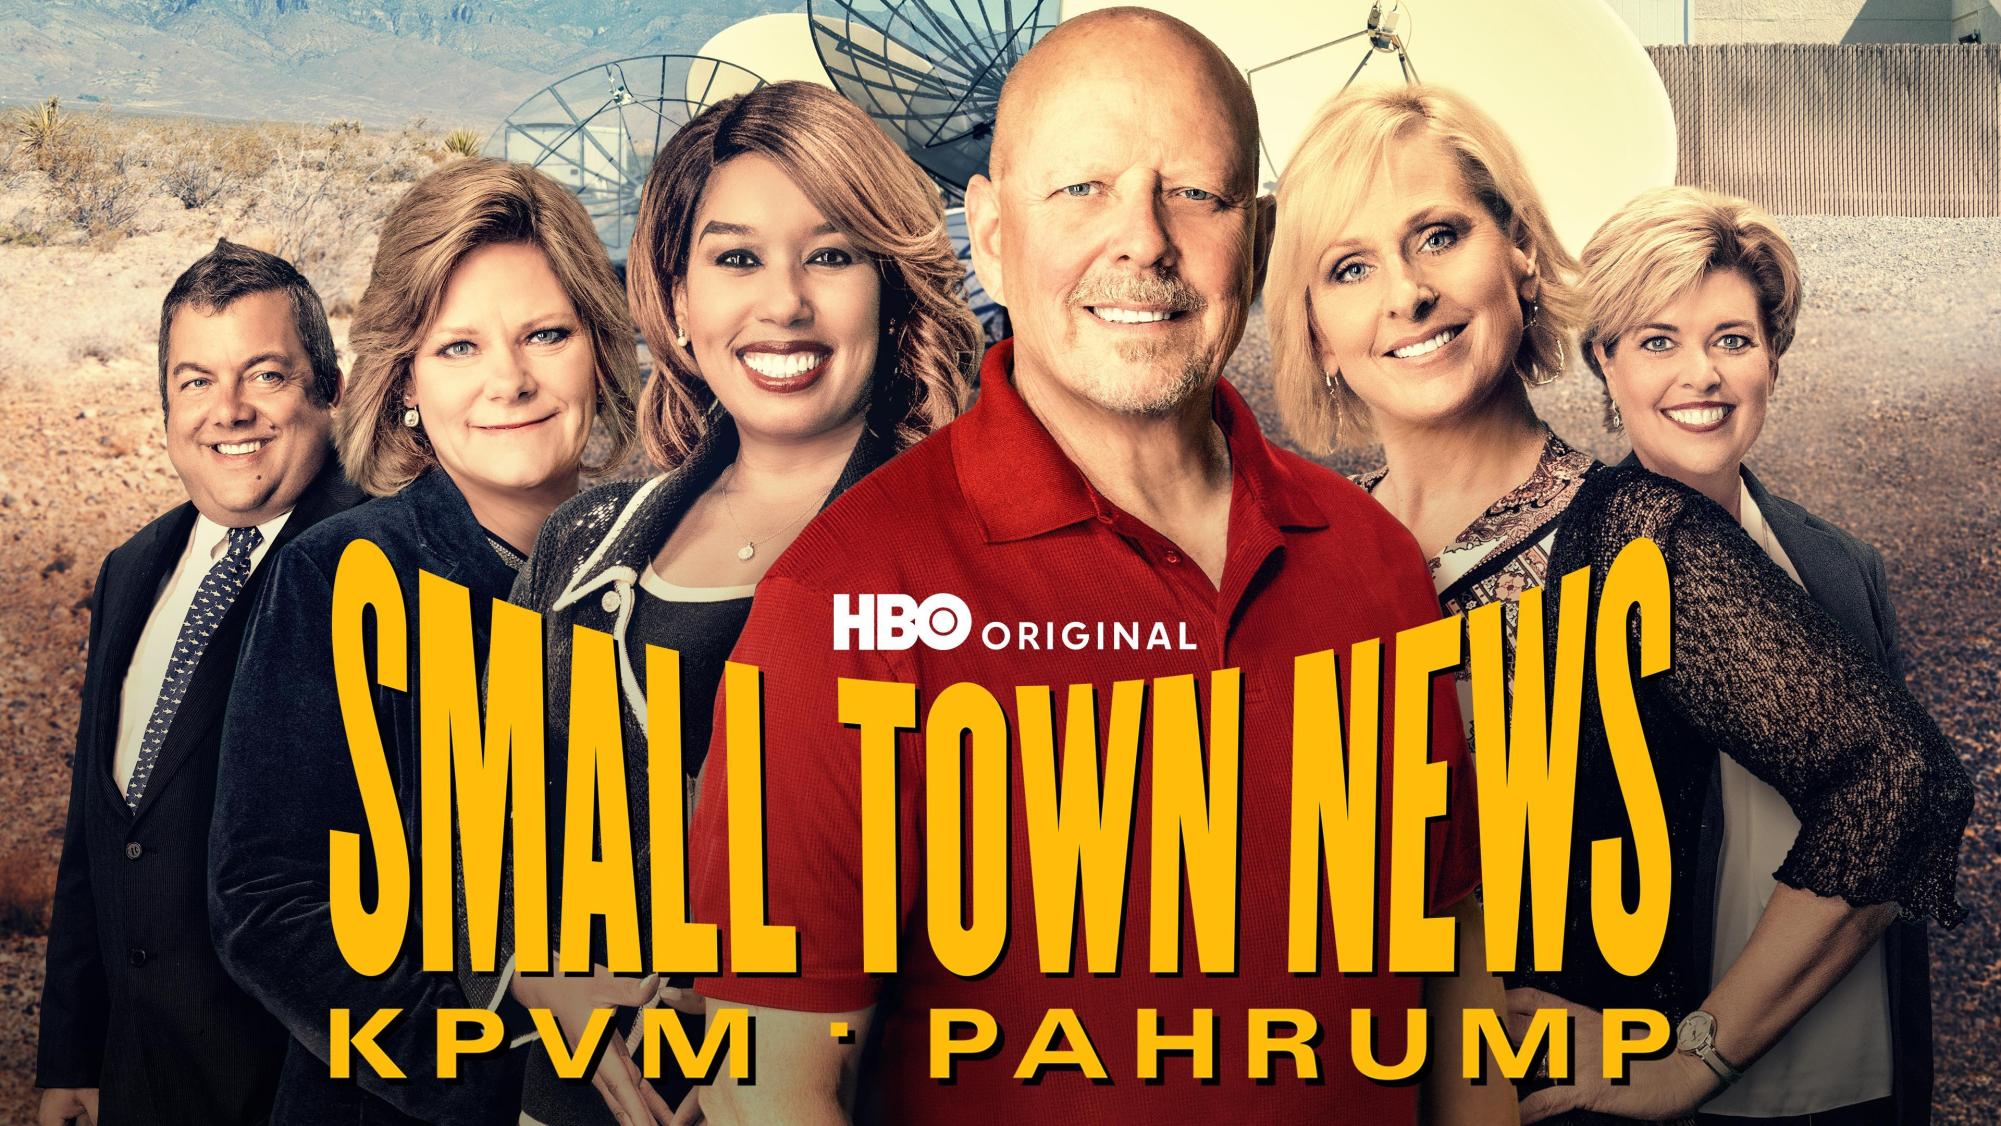 This promo for Small Town News shows some of the main characters from the series. Image courtesy of HBO.